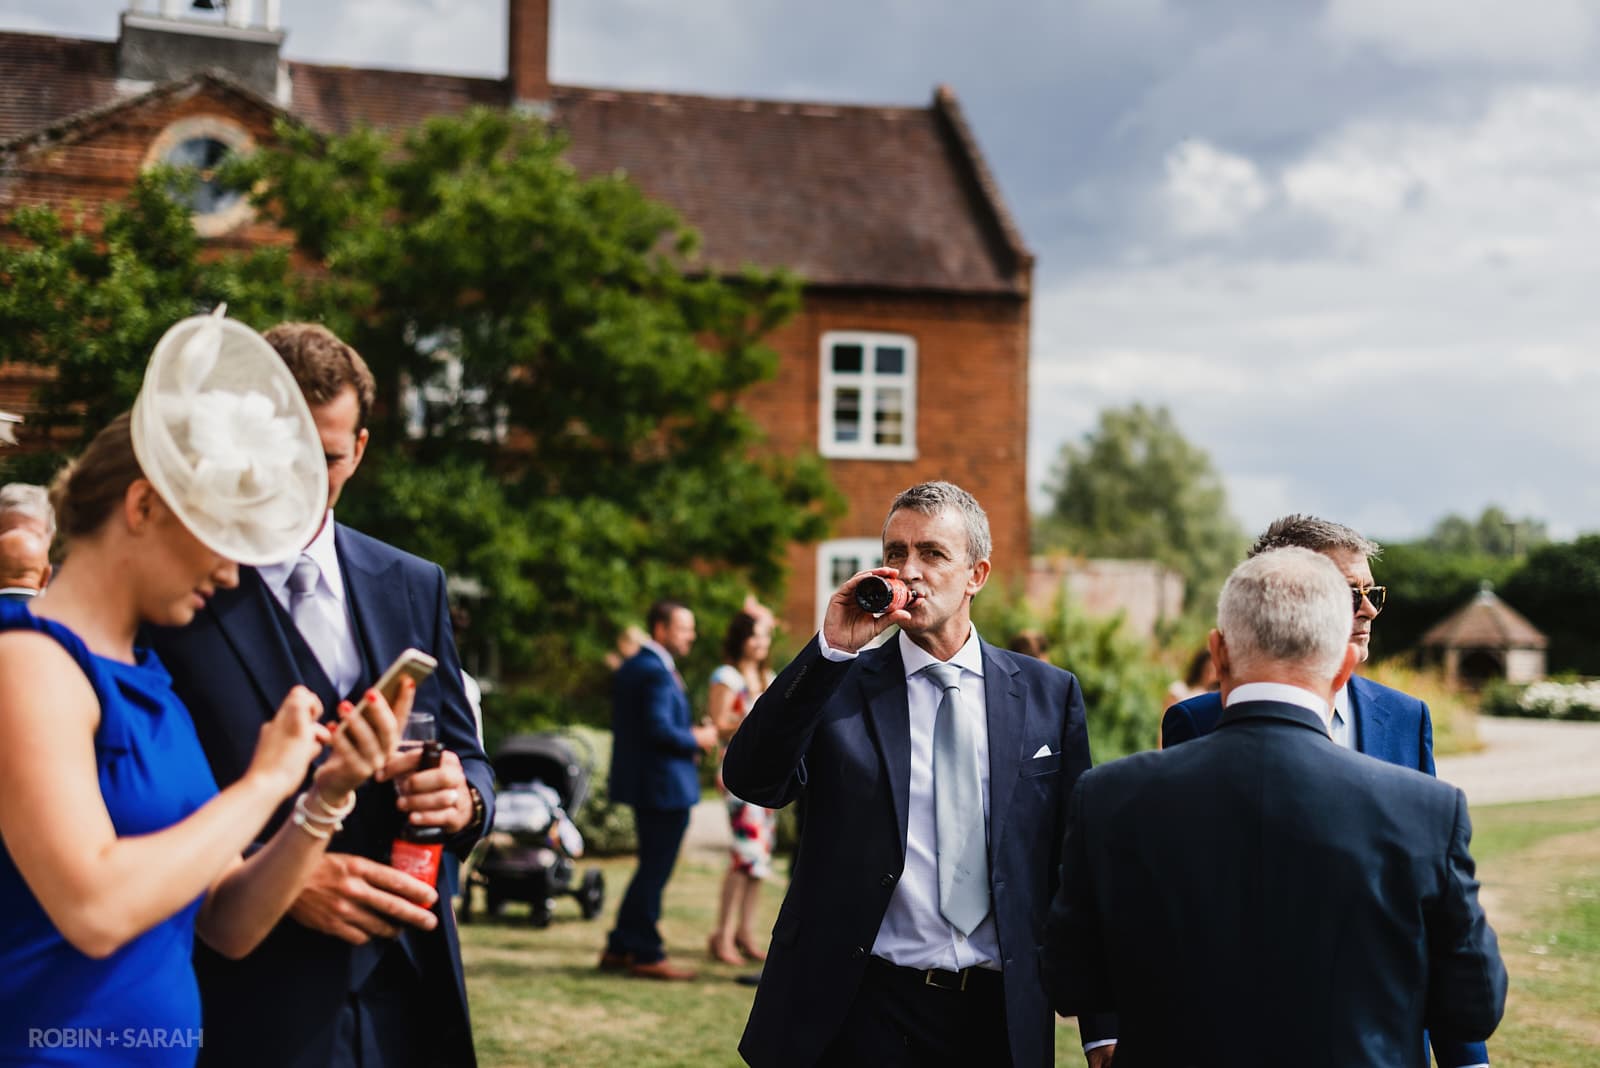 Wedding guests drink and chat during reception at Delbury Hall